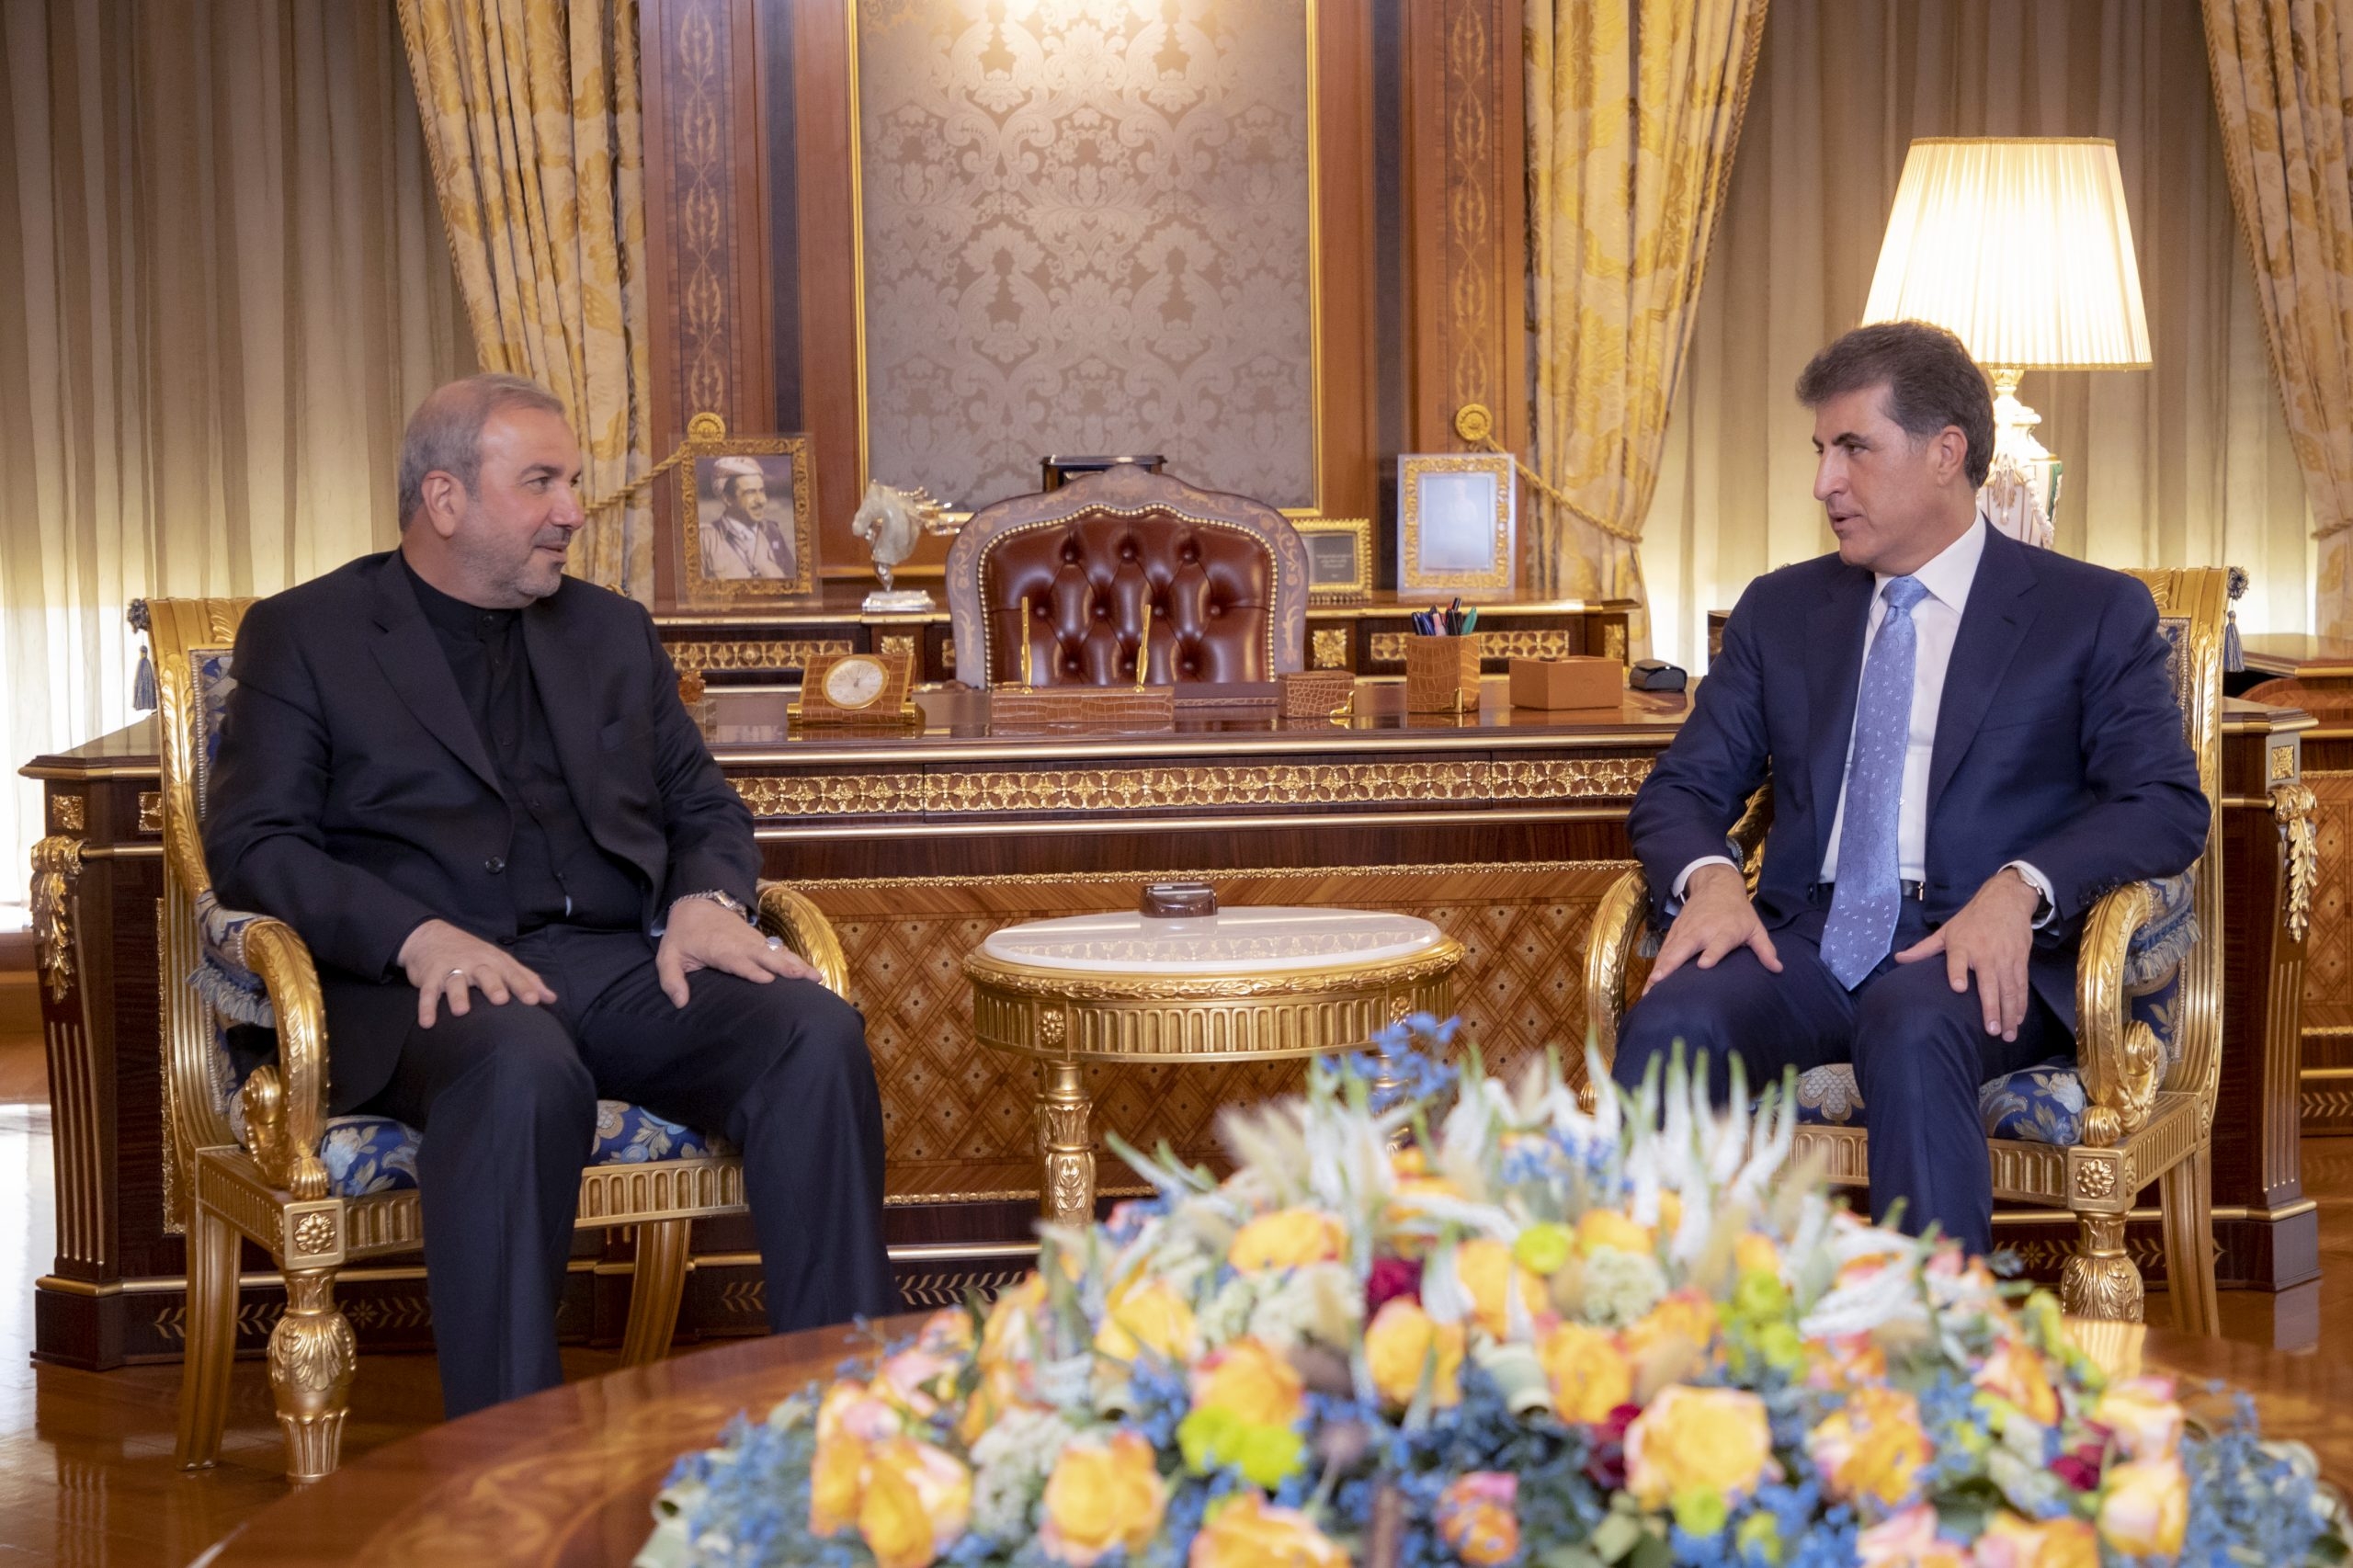 President Nechirvan Barzani Emphasizes Strong Relations with Iran, Ensures Security Cooperation